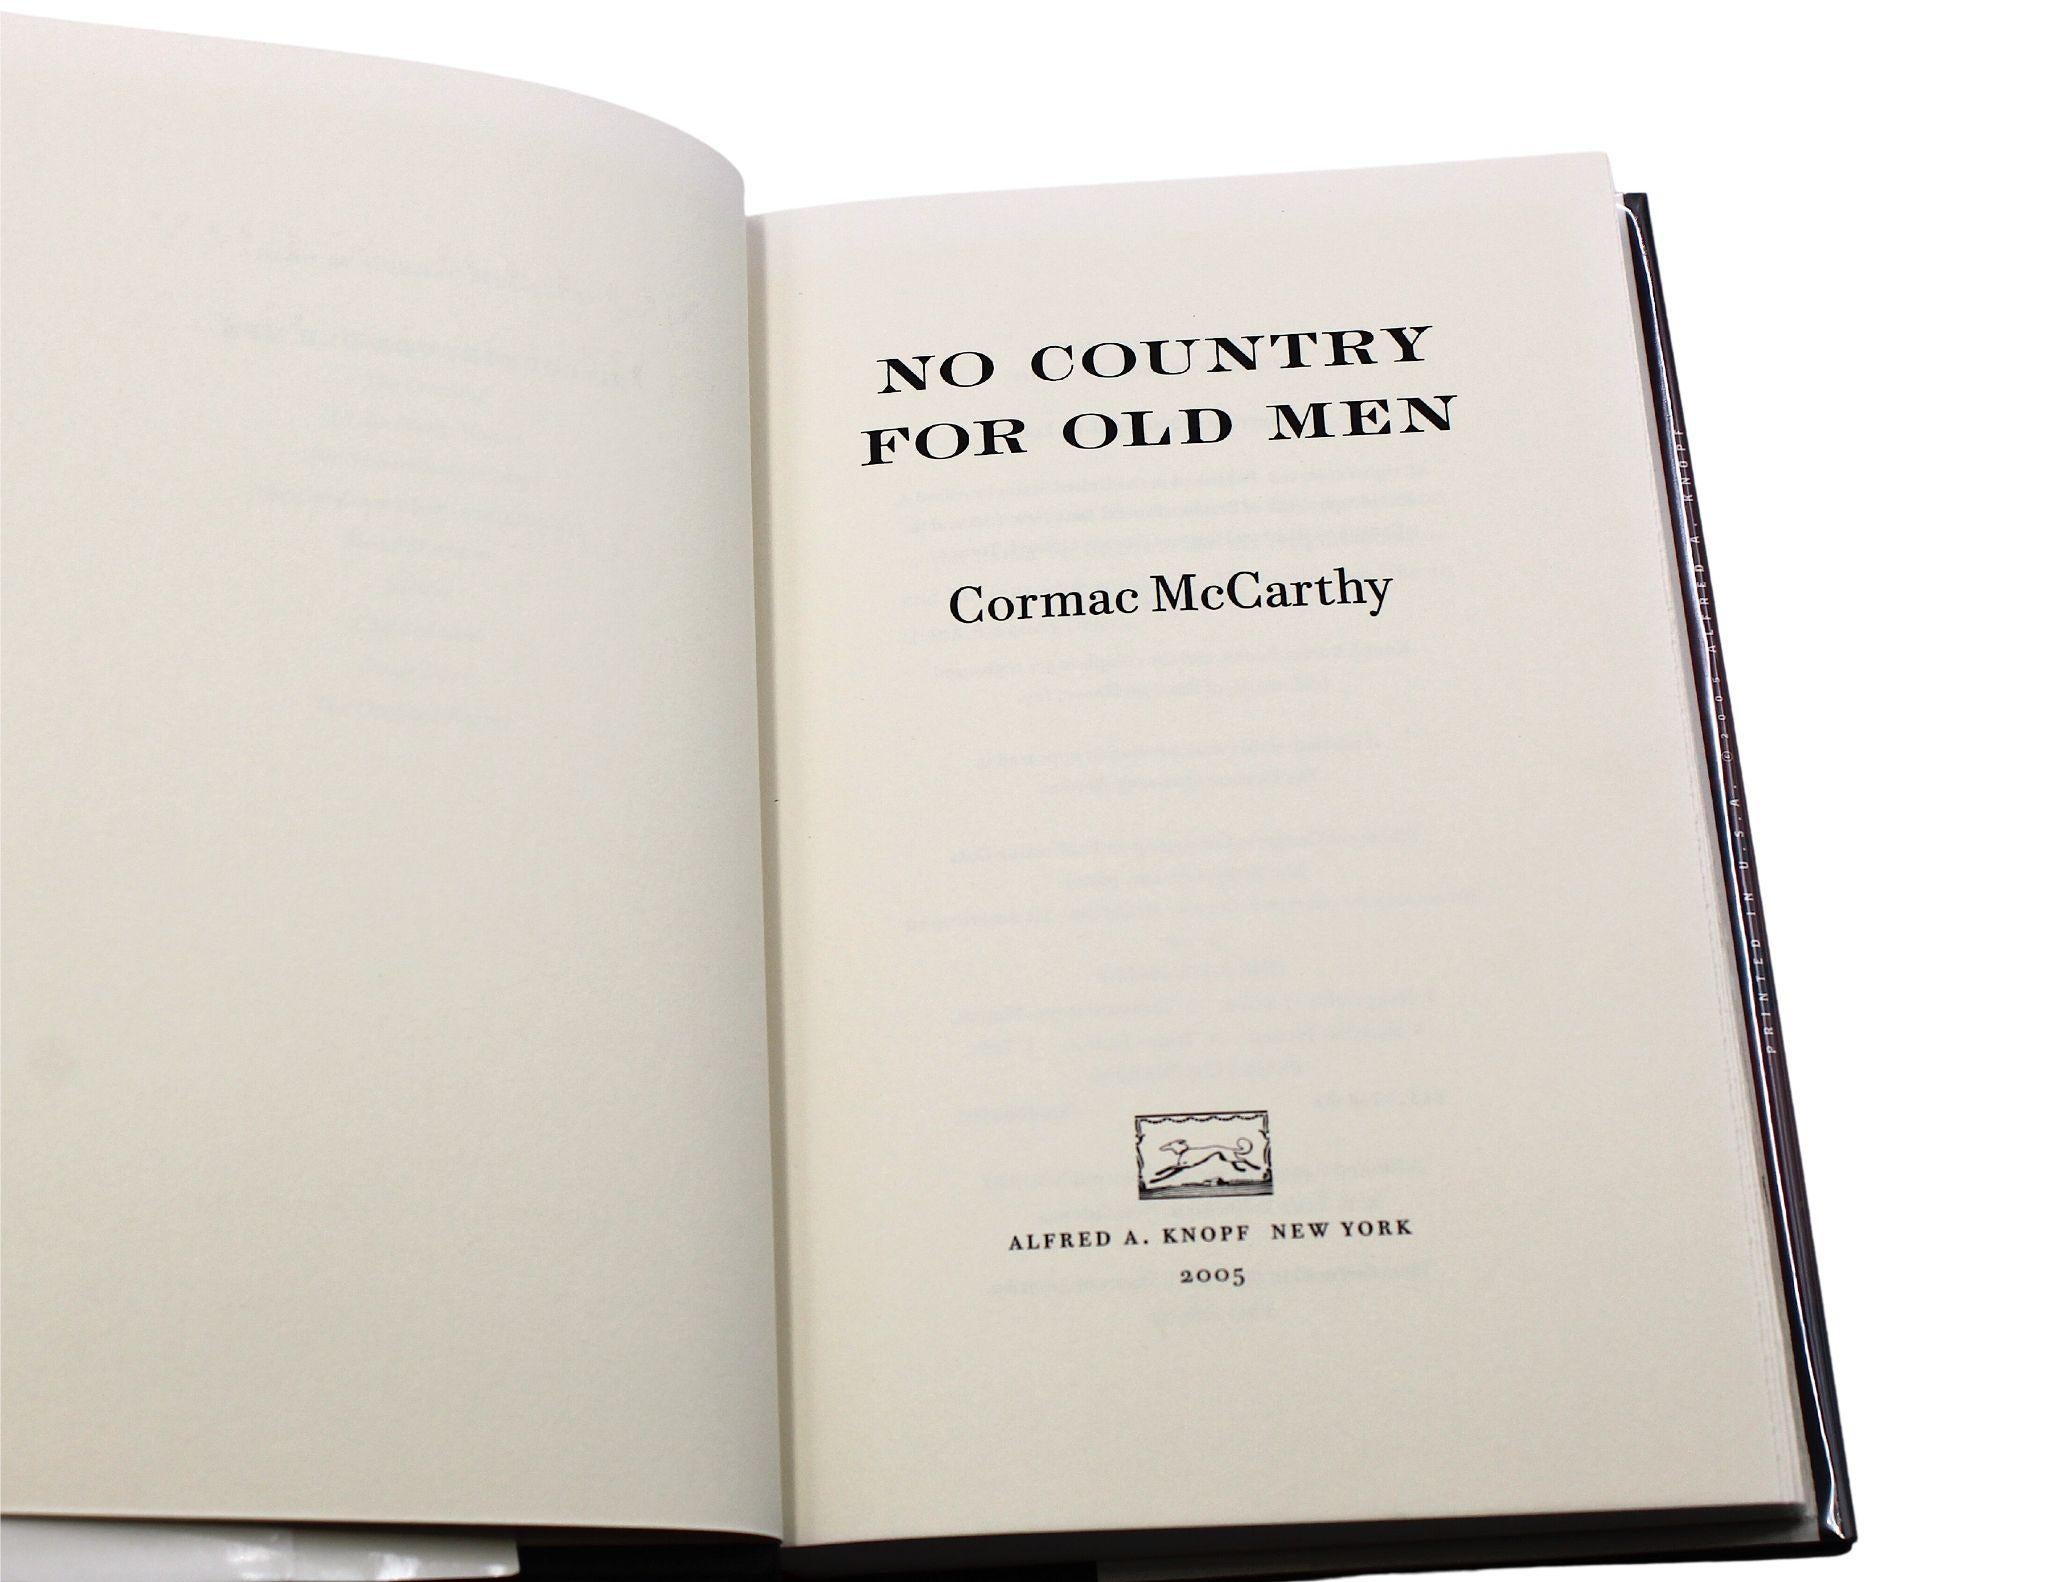 McCarthy, Cormac. No Country for Old Men. New York: Alfred A. Knopf, 2005. First Edition. Octavo. In original black cloth boards with gilt titles to the spine. Original publisher's dust jacket. 

Presented is a first edition printing of No Country